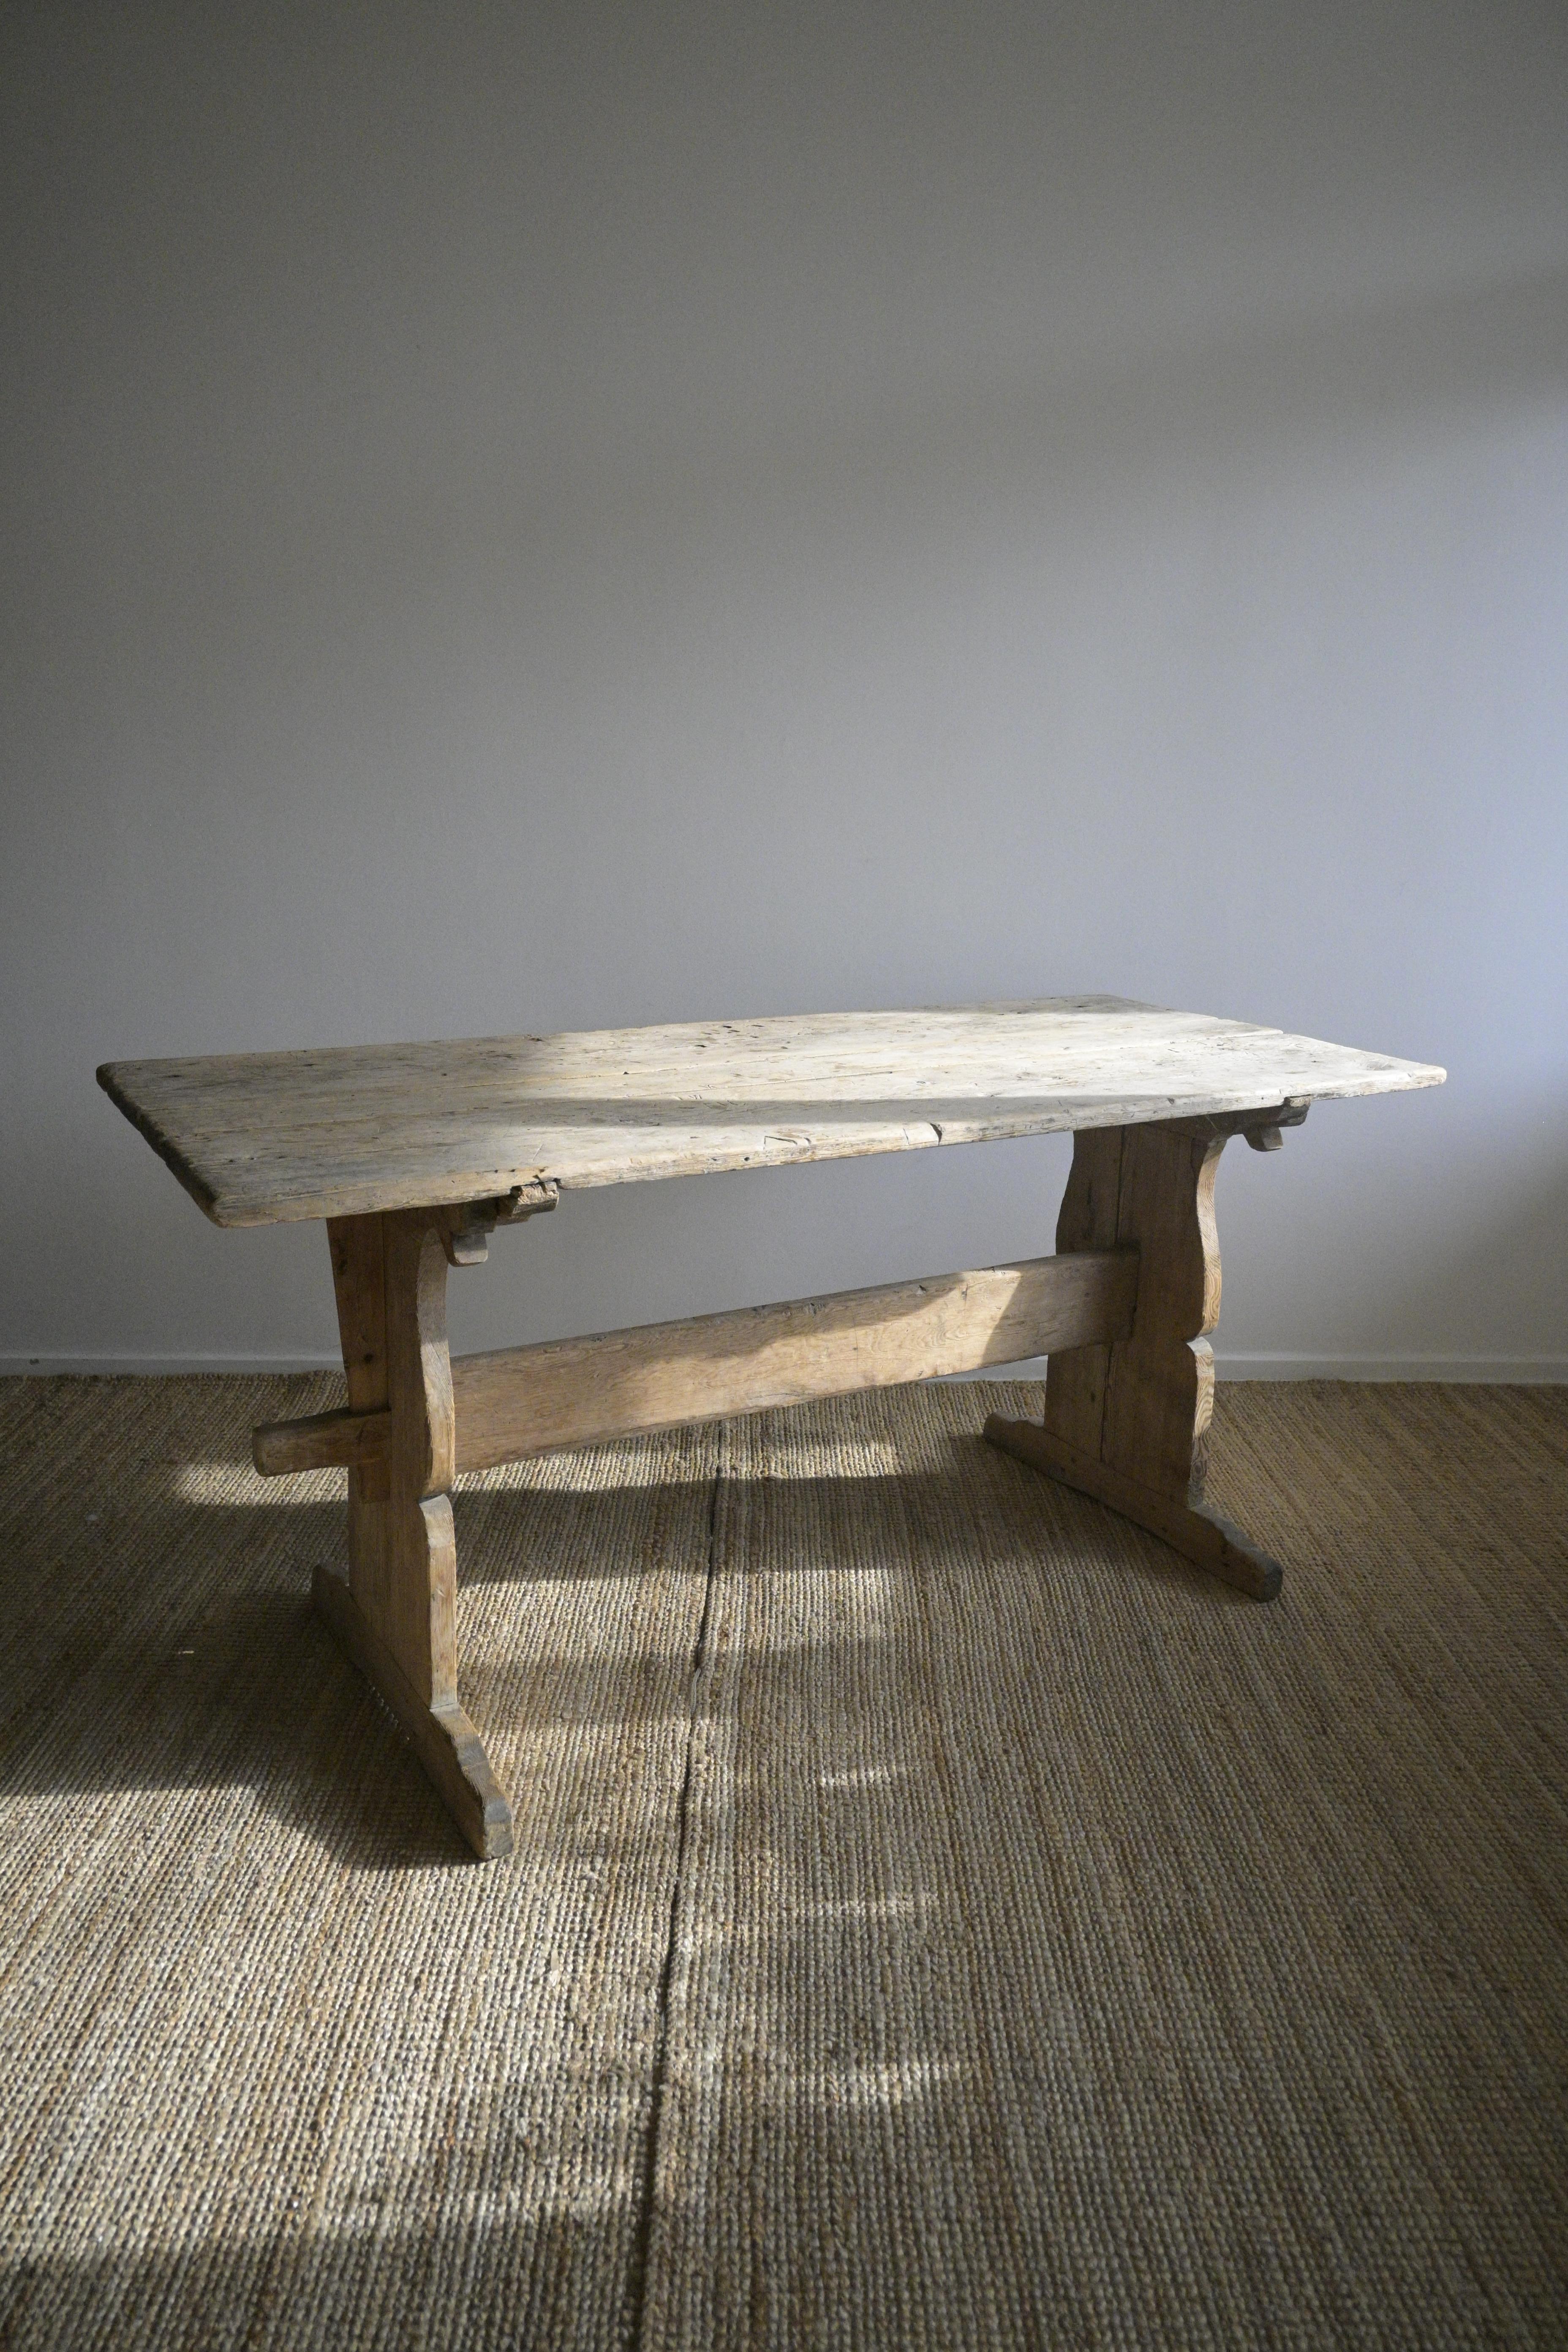 Swedish Trestle Table from Järvsö, Hälsingland, circa 1760-1780

It has markings, cracks, and letters carved into the top, to say it has a rustic feel is an understatement.

Additionally, there is a salt indentation (pit) in the corner, due to the